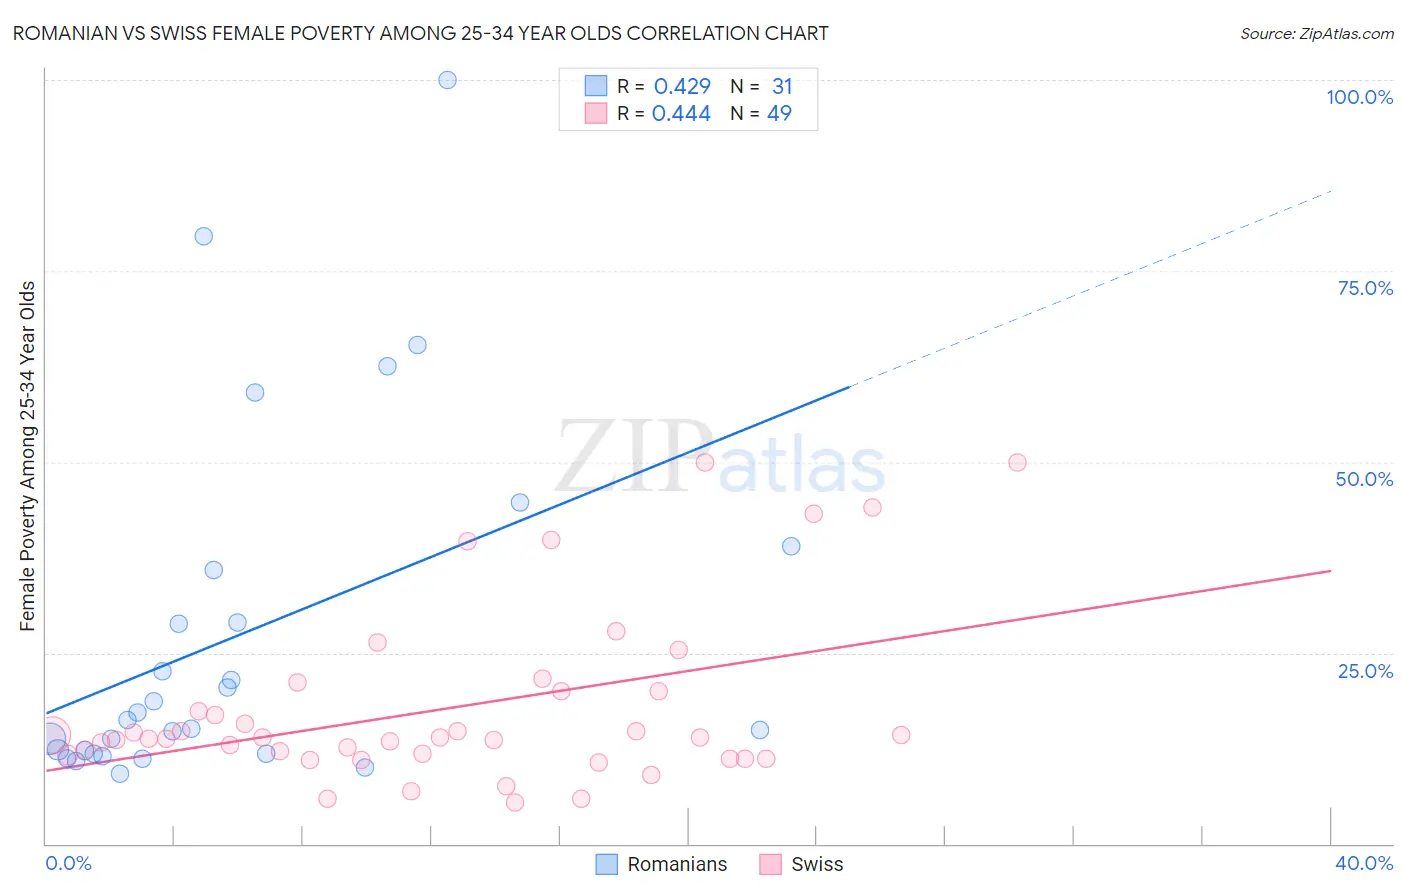 Romanian vs Swiss Female Poverty Among 25-34 Year Olds